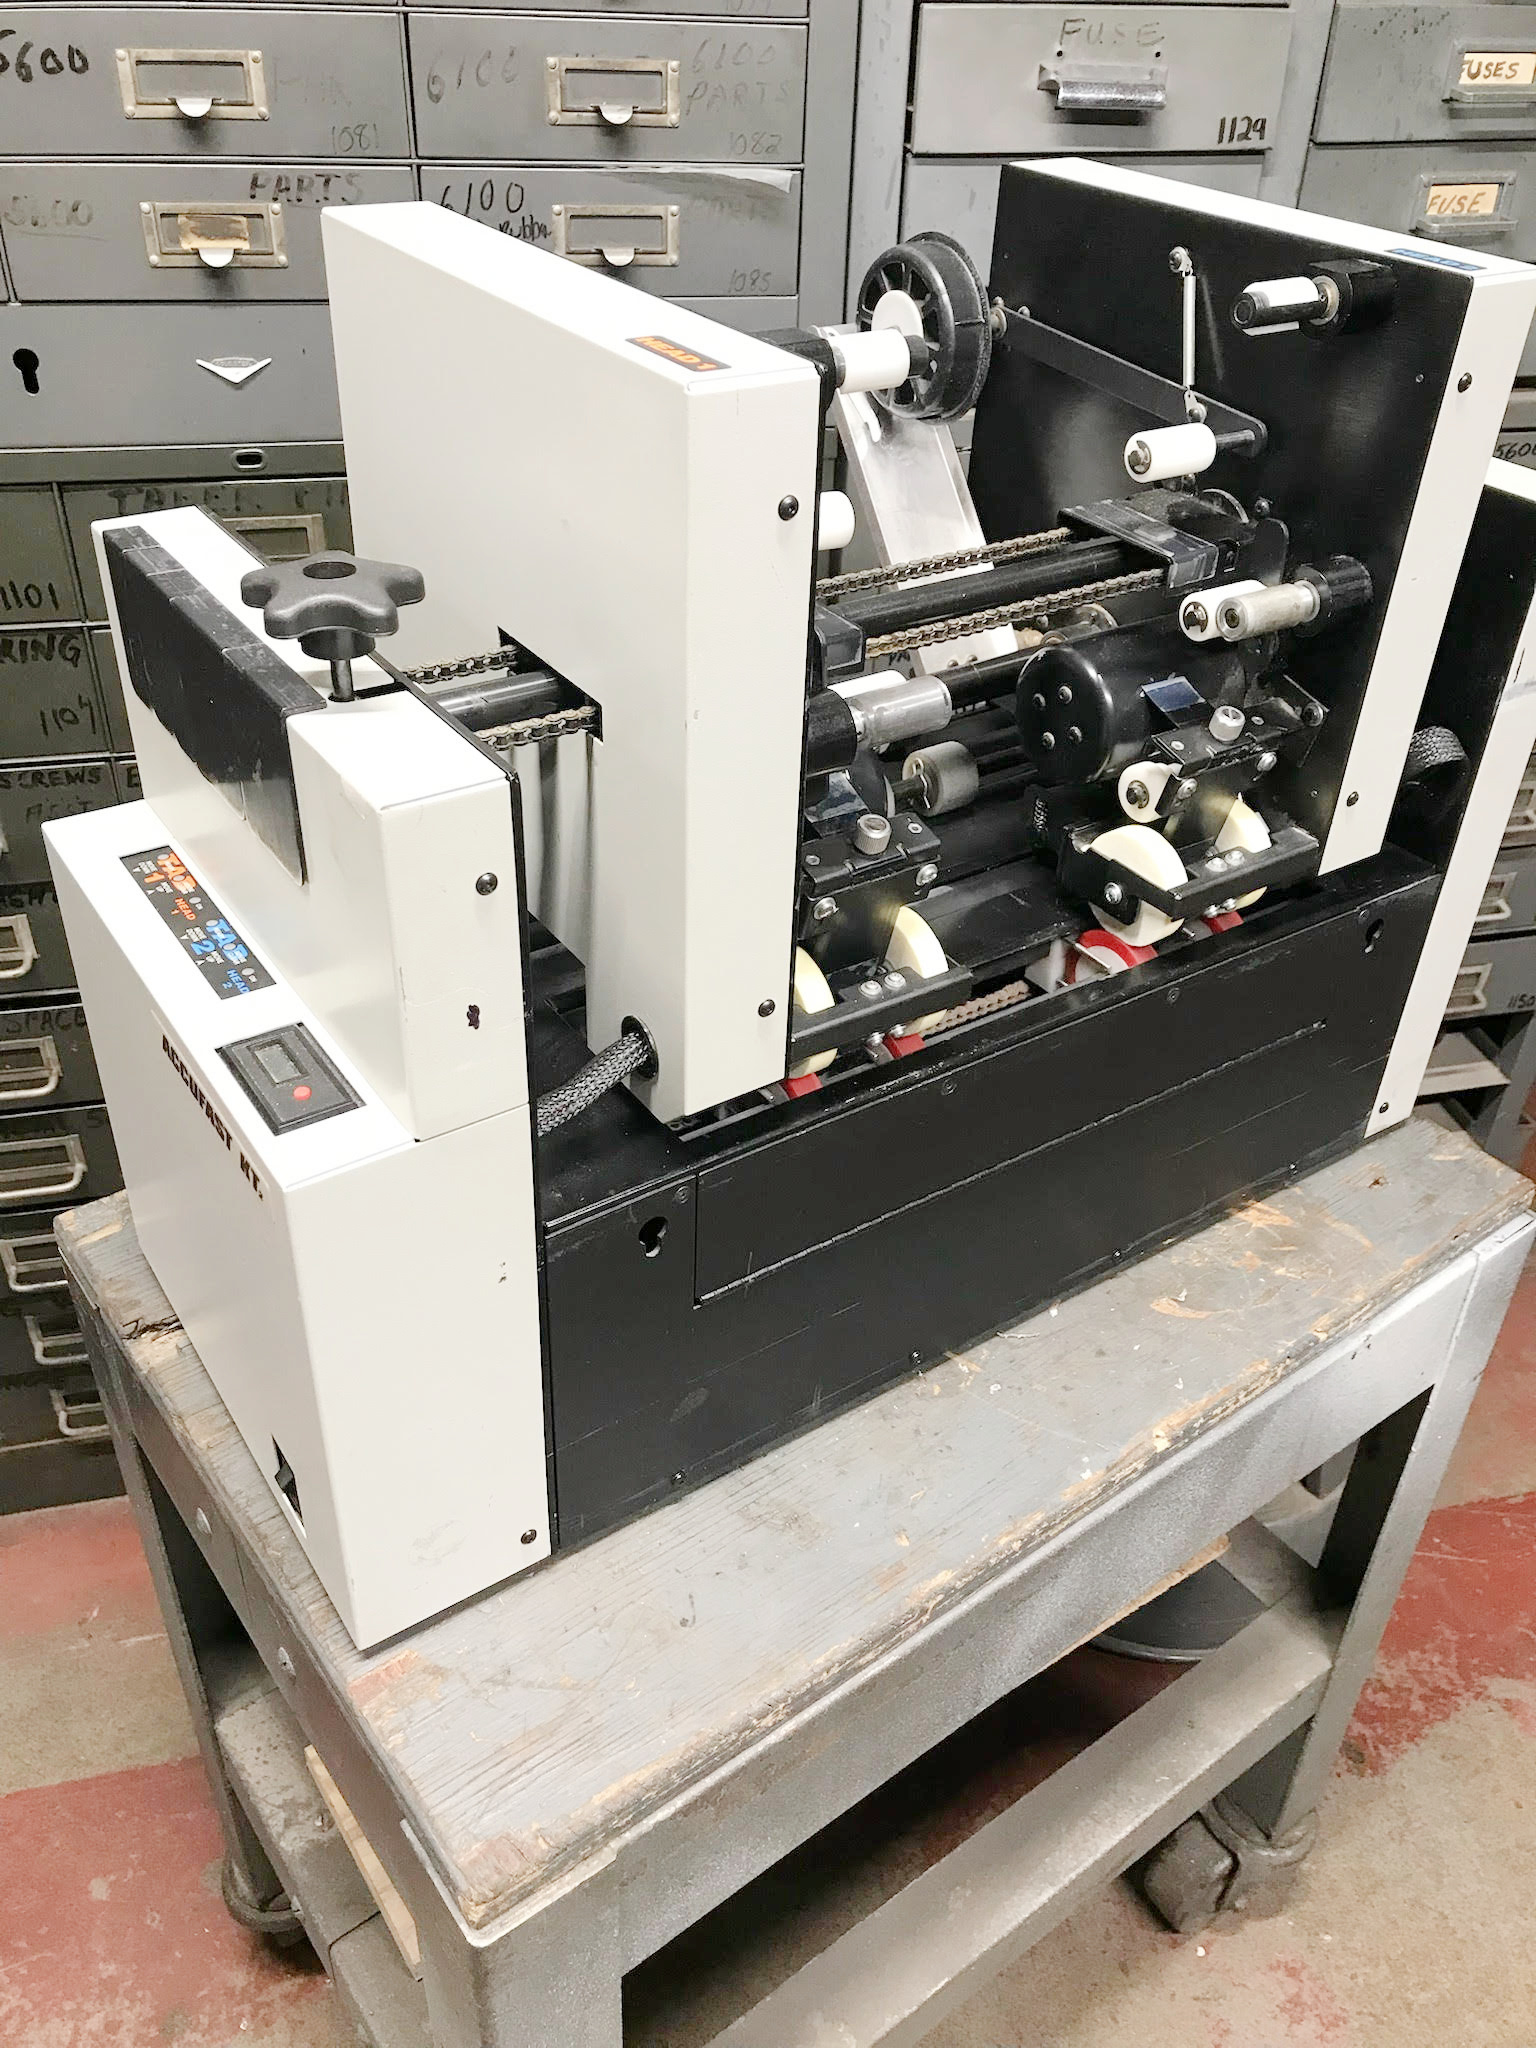 Equipment Lot: Accufast XL Labeler with Stamp Affixer & Accufast KT with FX (Refurbished) Item # UE-011122A (New Hampshire)